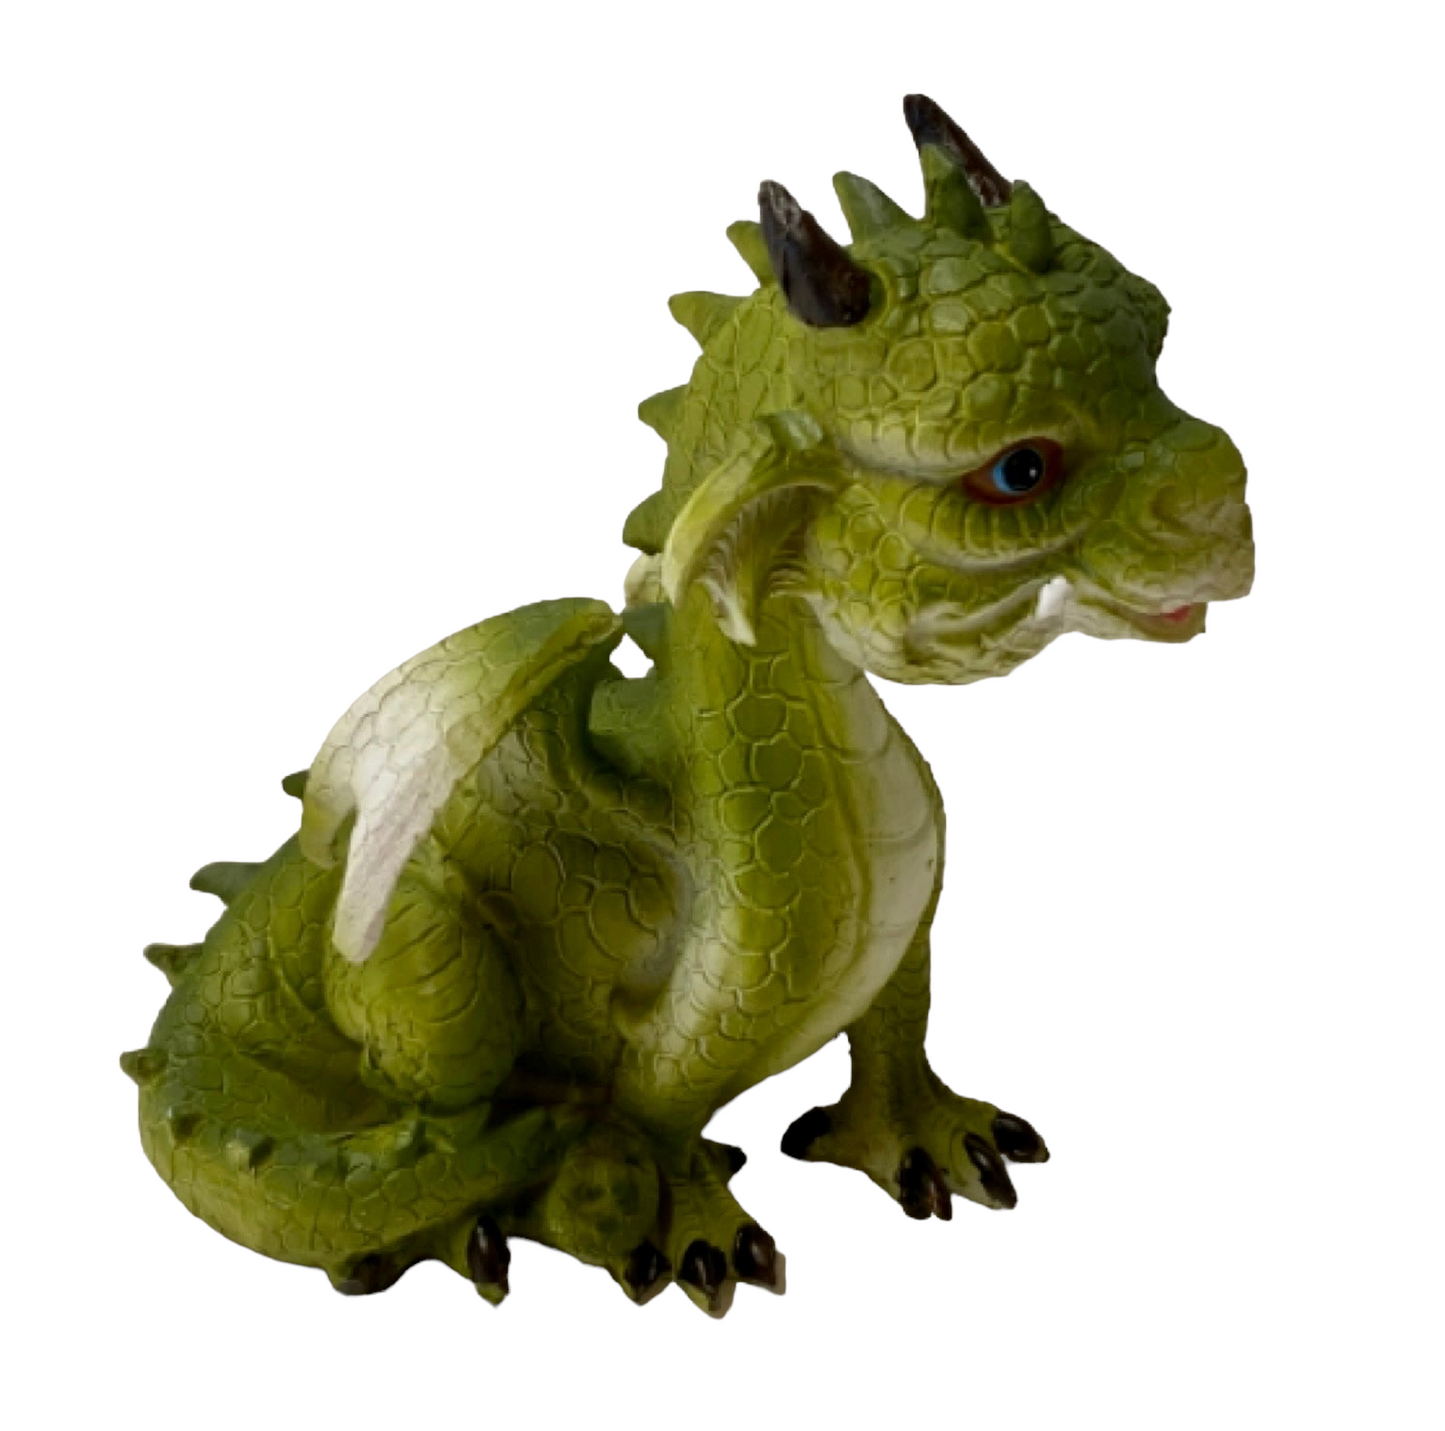 Dragon Cheeky Sitting Ornament - The Renmy Store Homewares & Gifts 